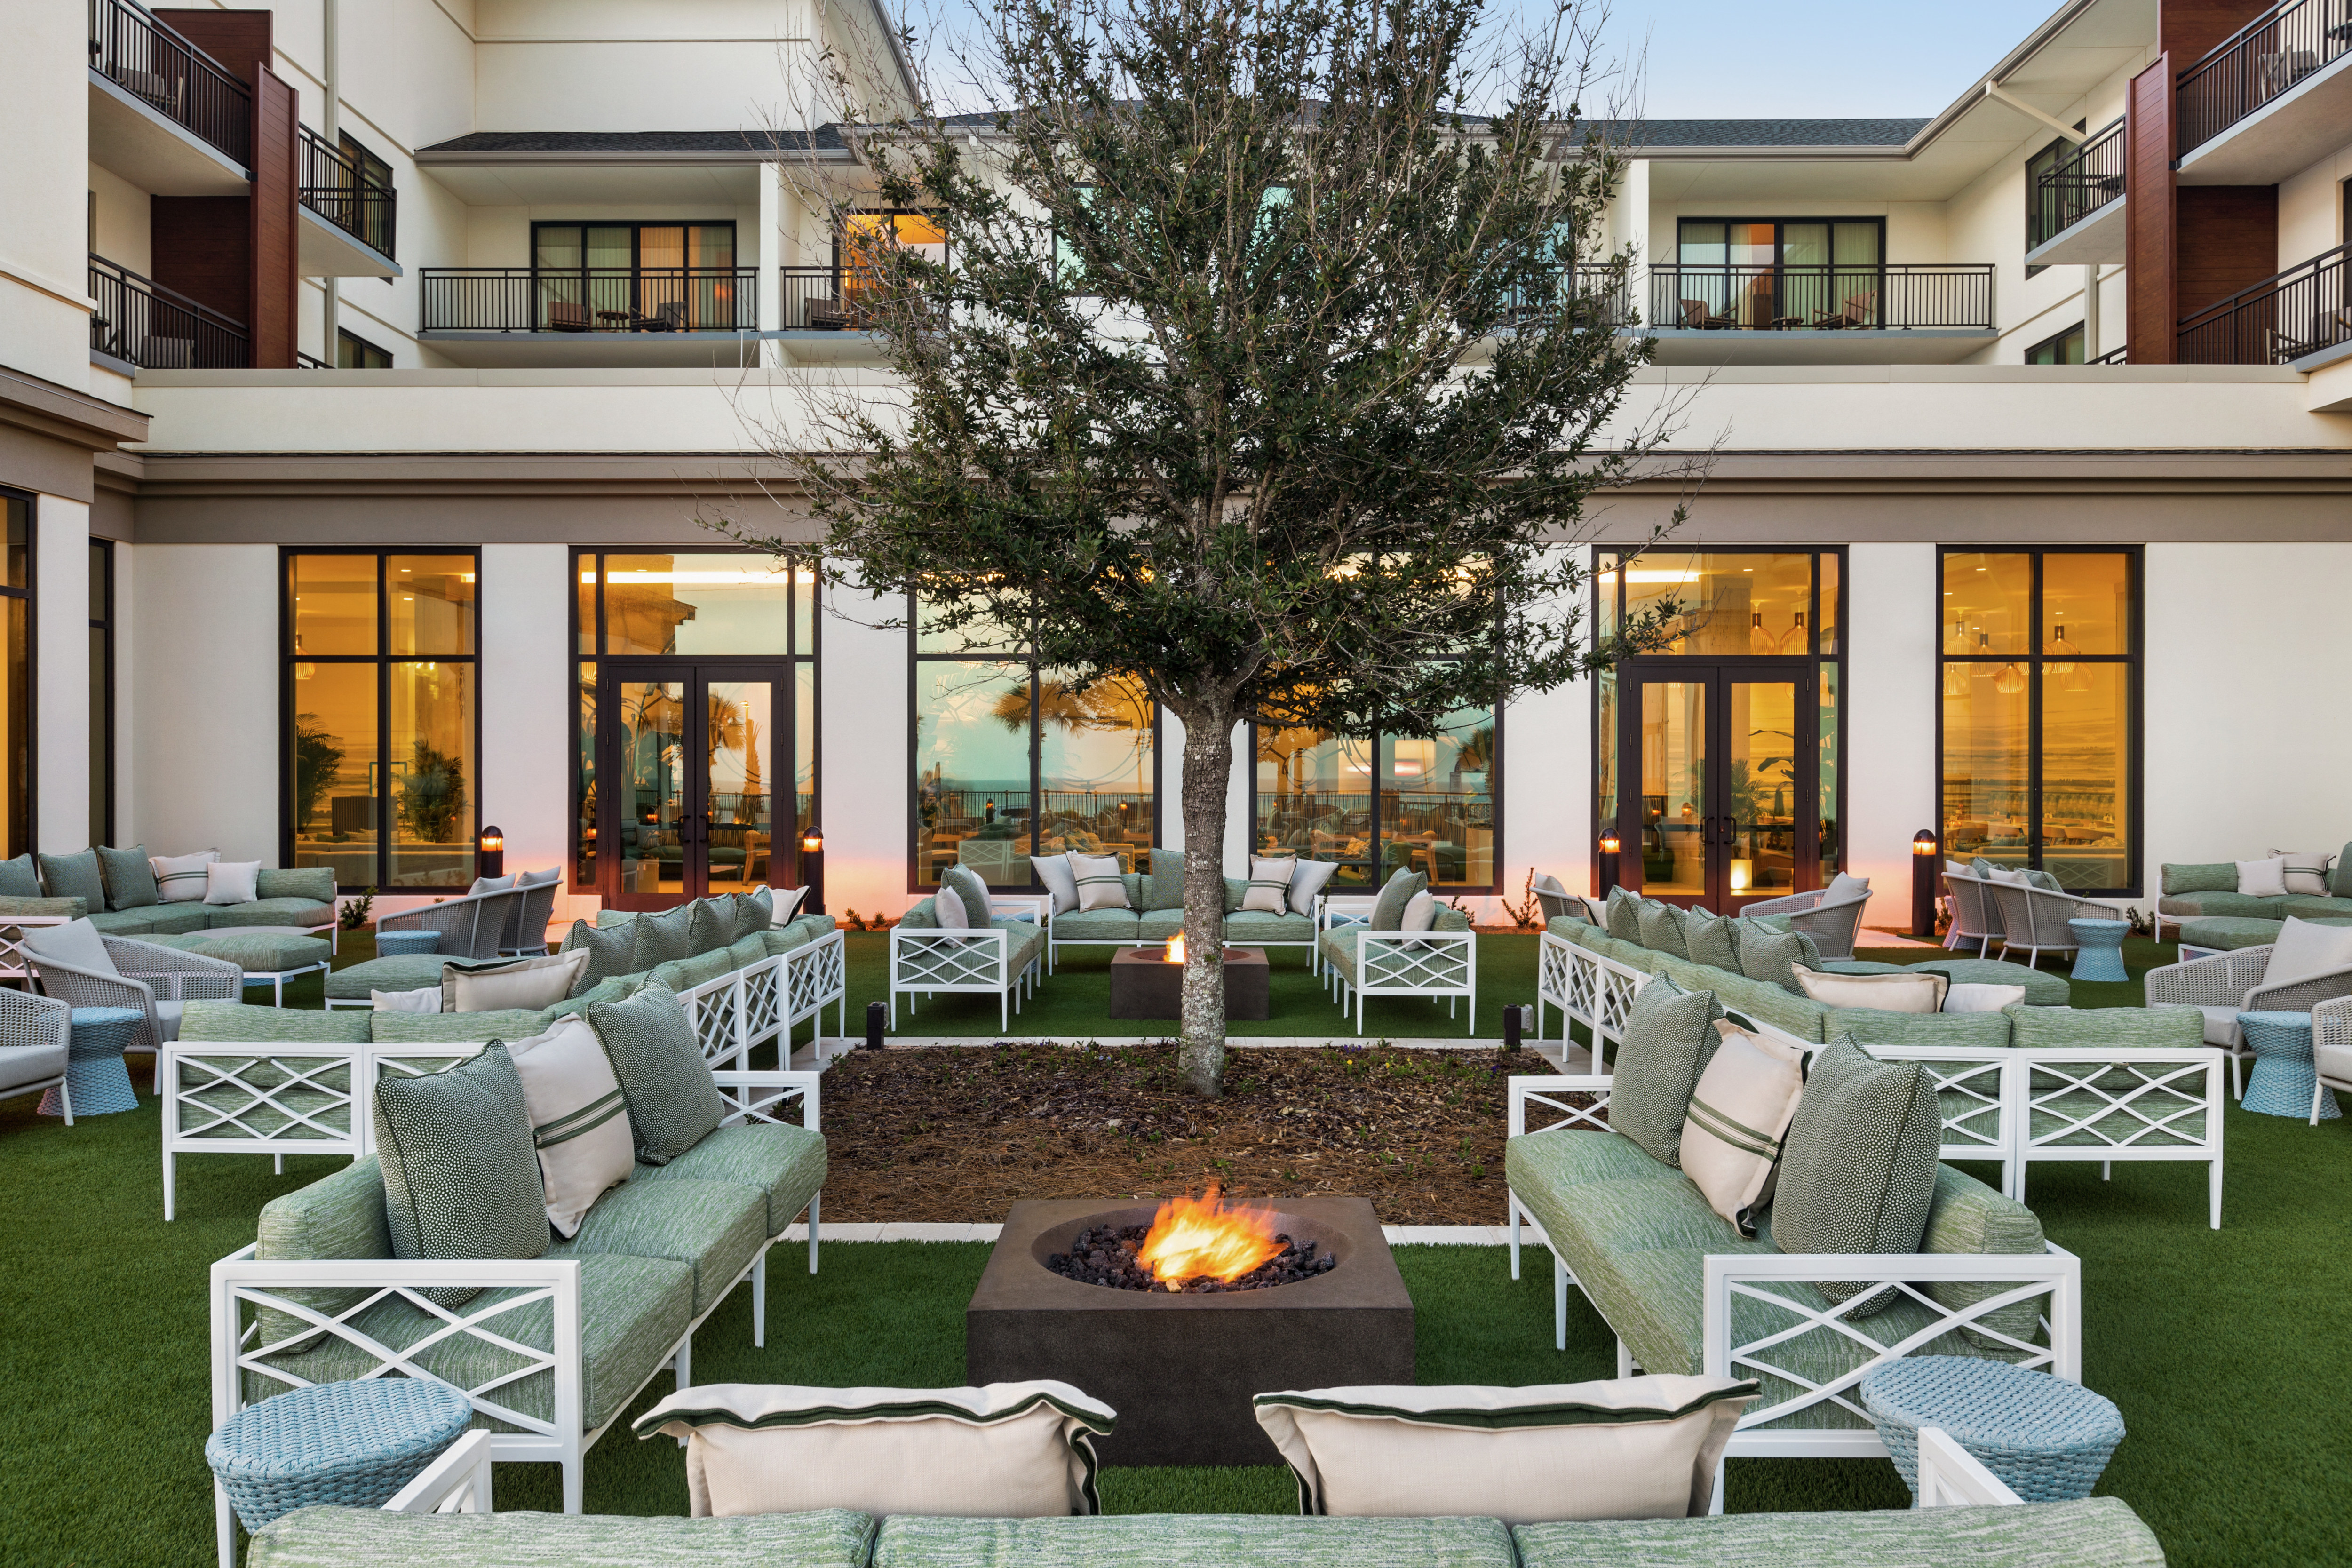 Outdoor courtyard fire pit at dusk surrounded by ample, sofa seating areas